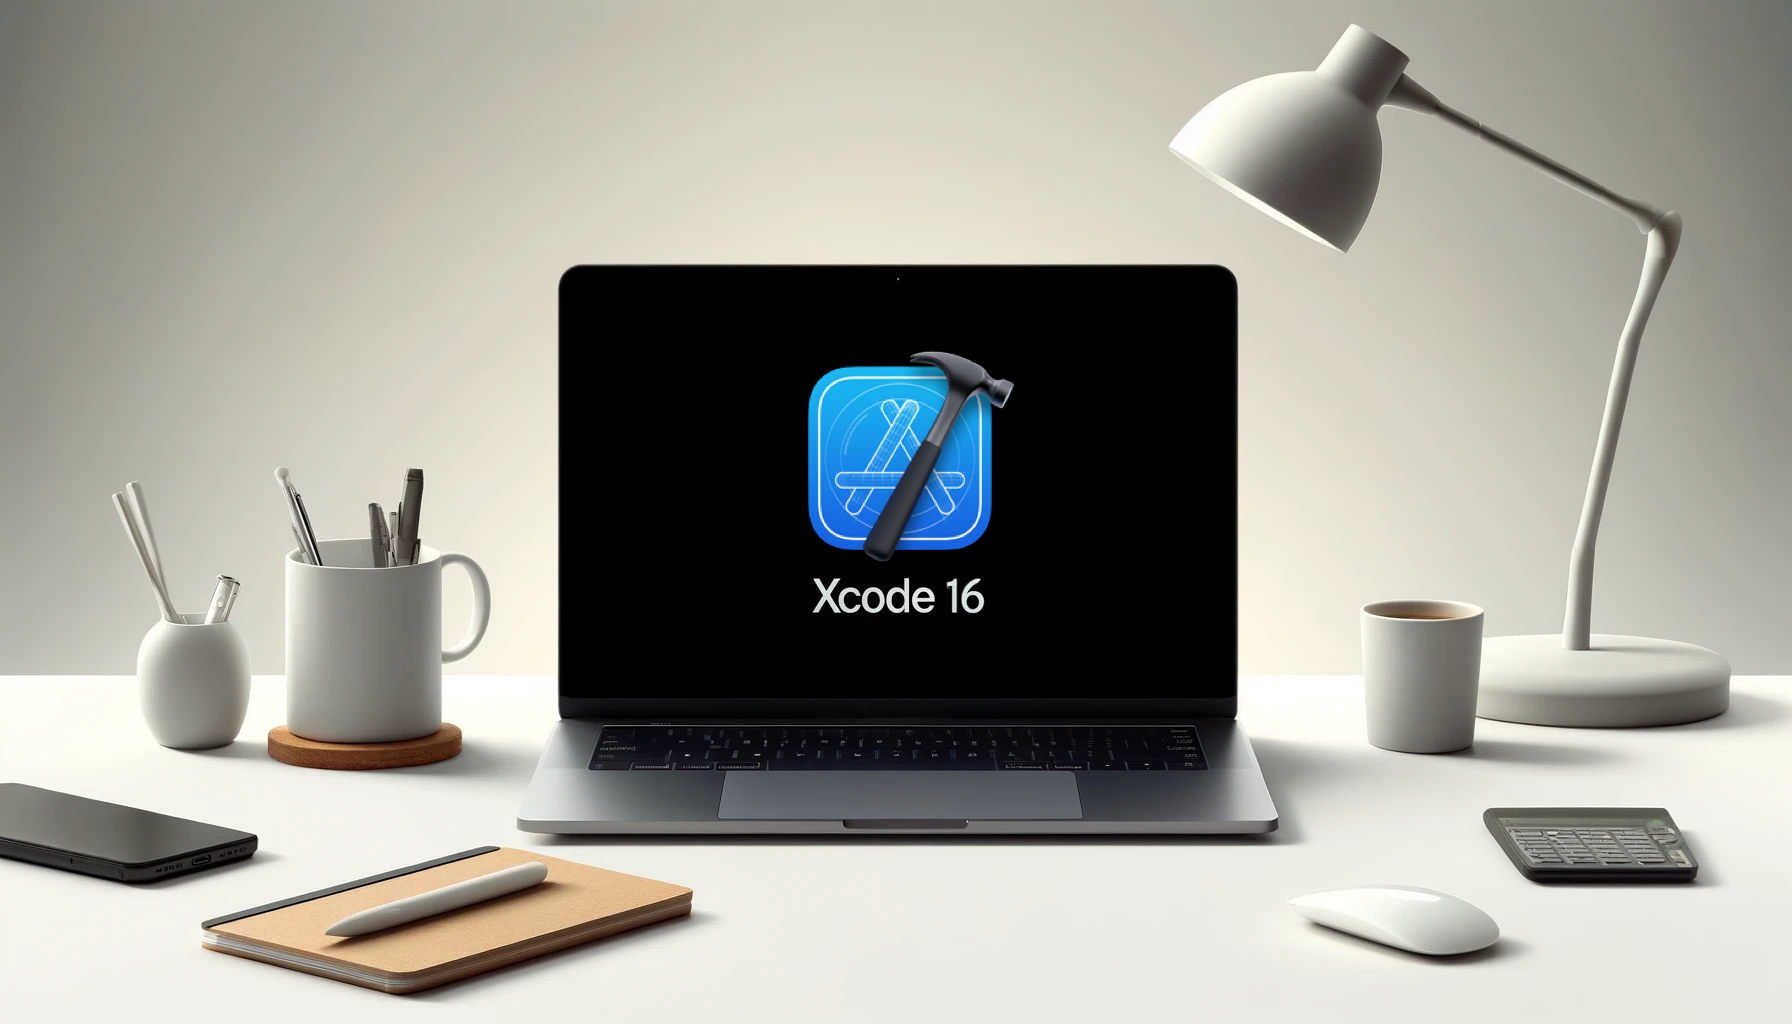 Xcode 16 on a screen